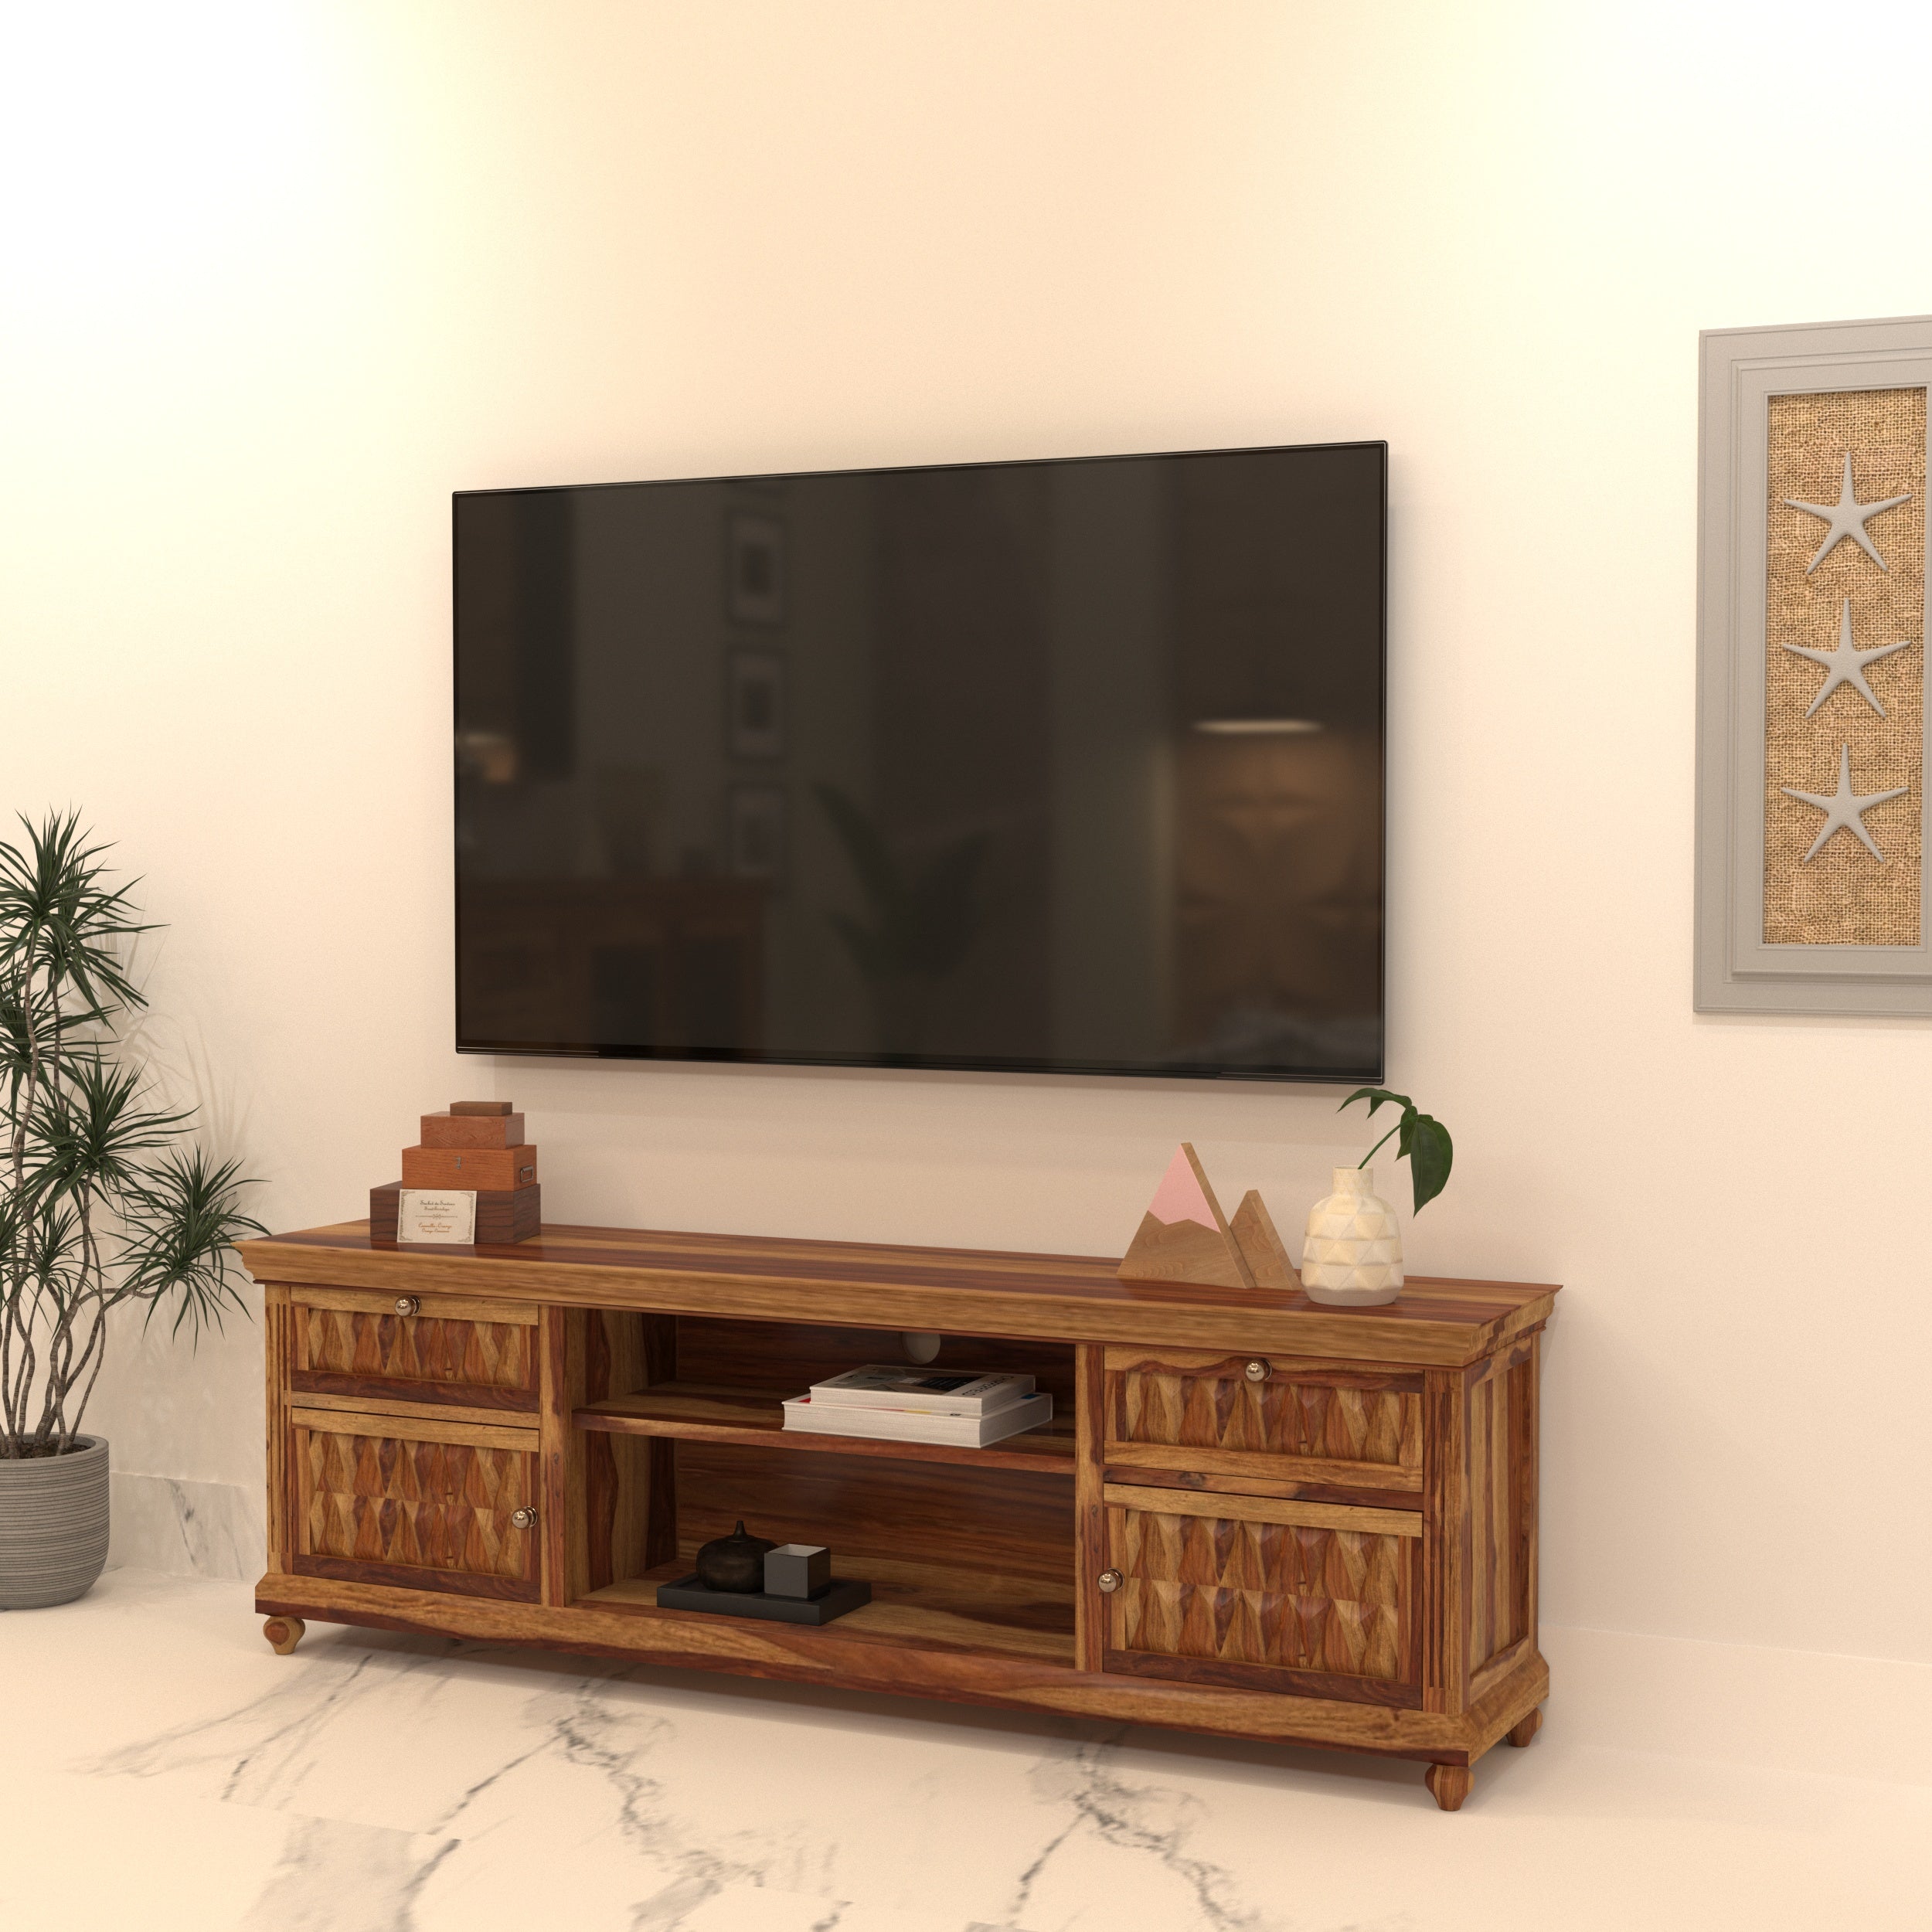 Unique Multi-Storage Wooden Handmade Long Cabinet Tv stand